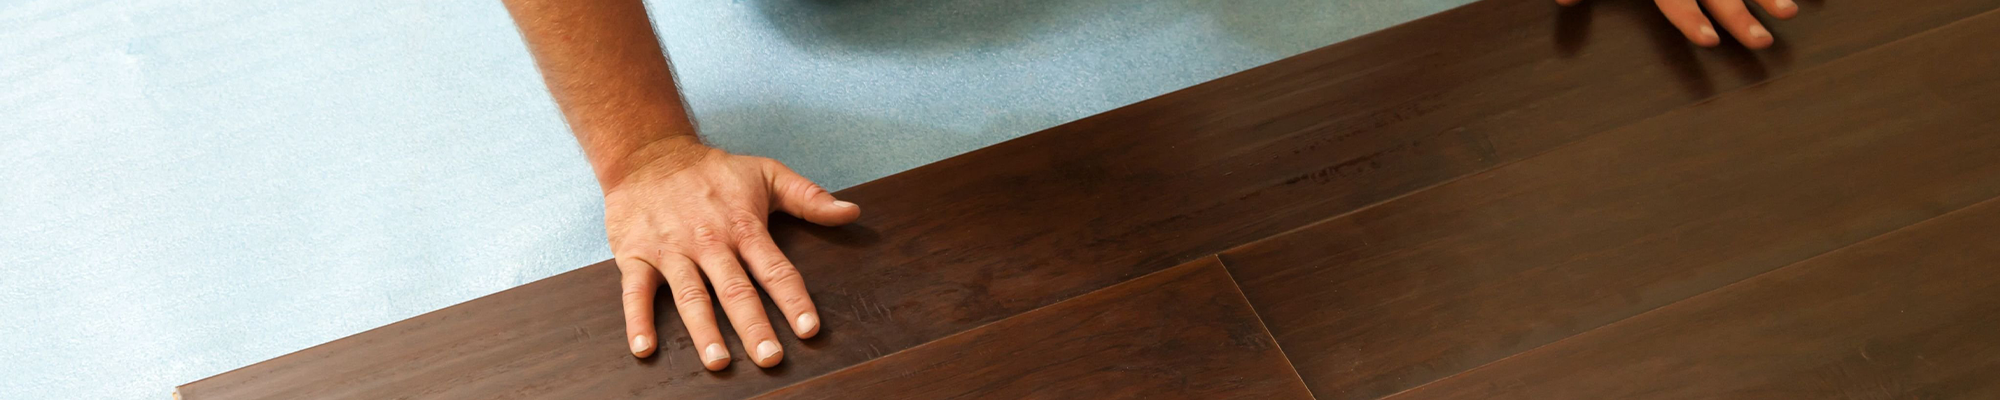 closeup of person installing flooring - Classic Carpets in Midland, TX